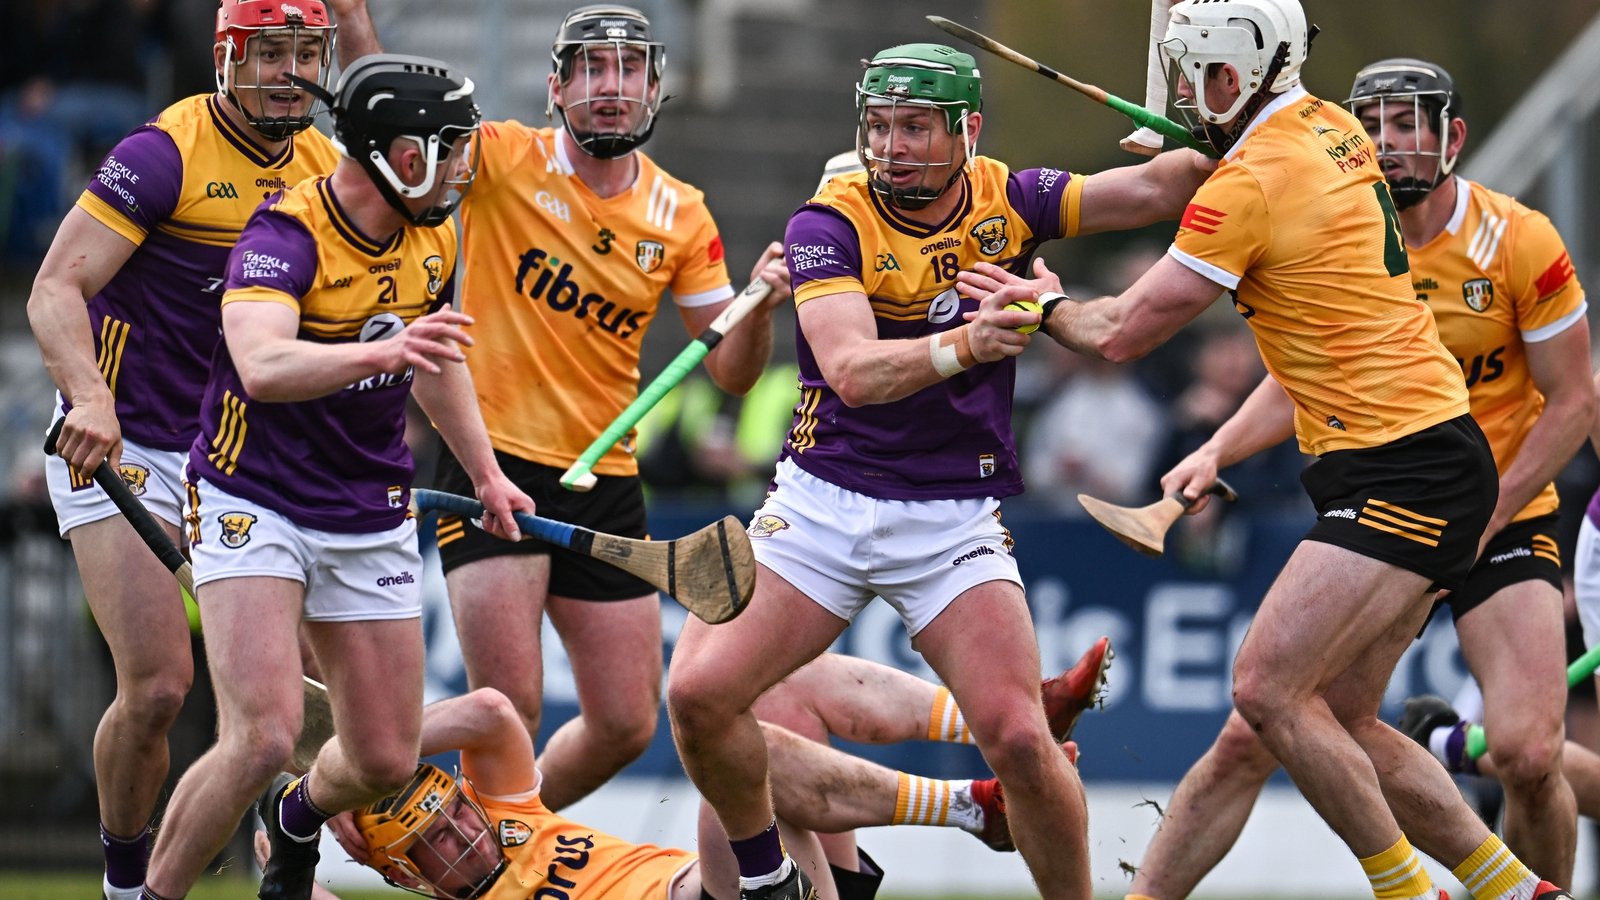 'Wexford need to turn up or face annihilation'